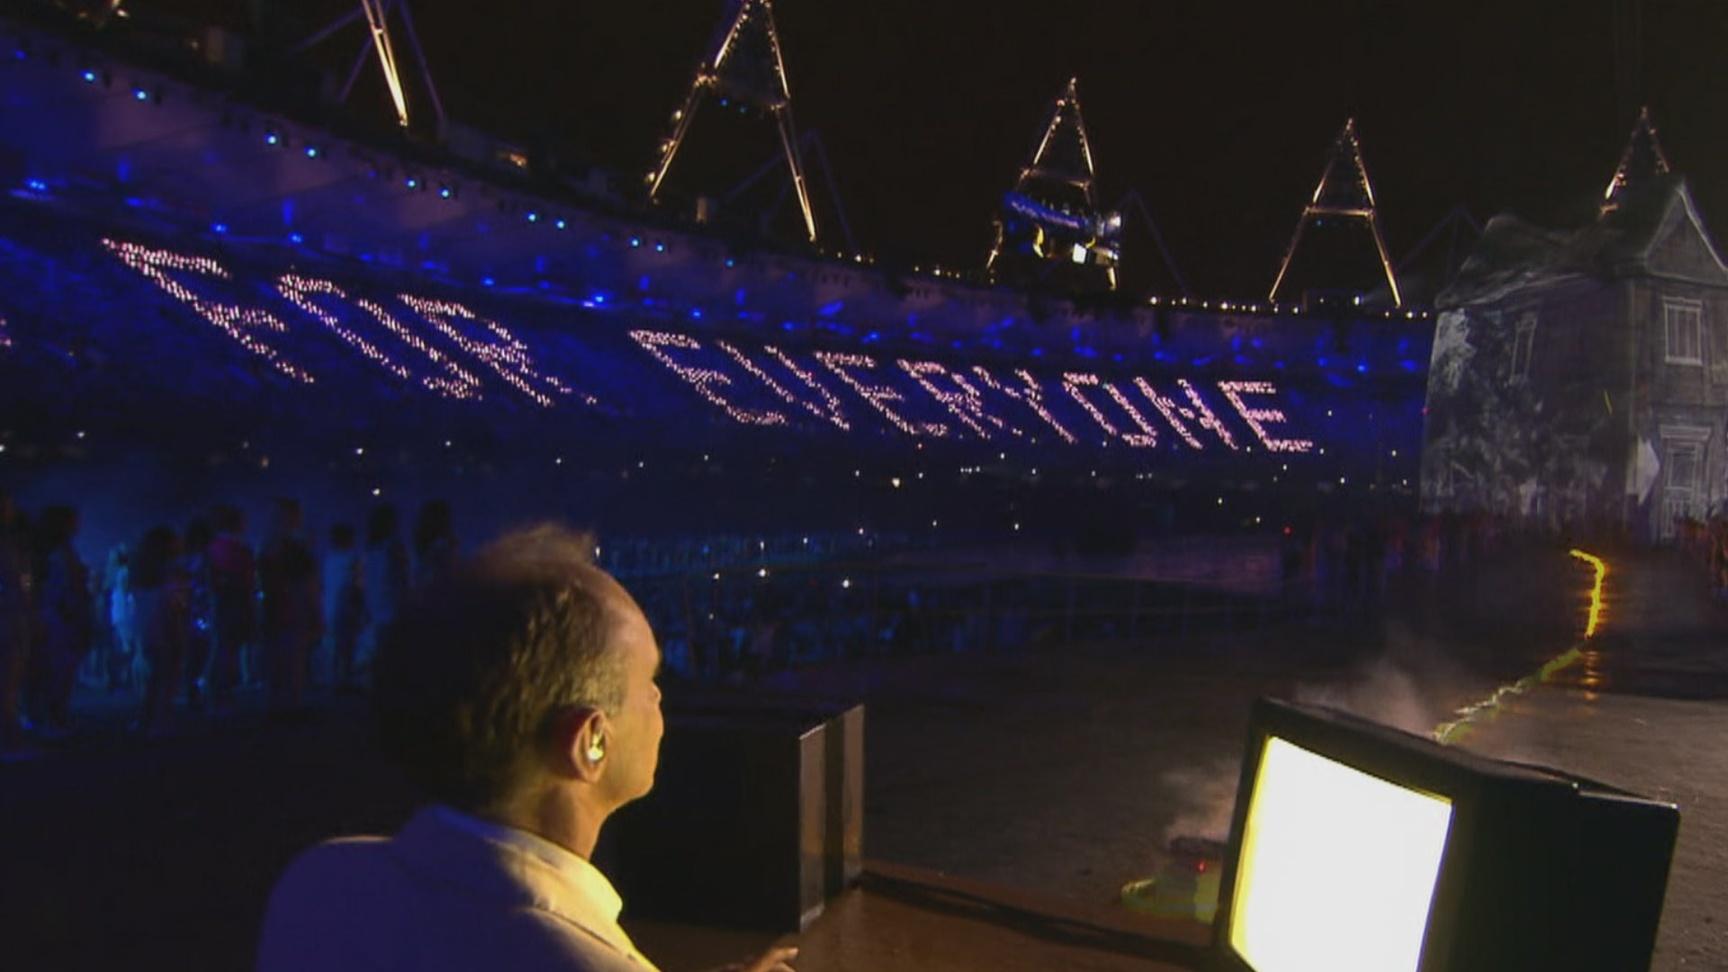 Tim Berners-Lee tweets that 'This is for everyone' at the 2012 Olympic Games opening ceremony using the NeXT computer he used to build the first browser and web server.